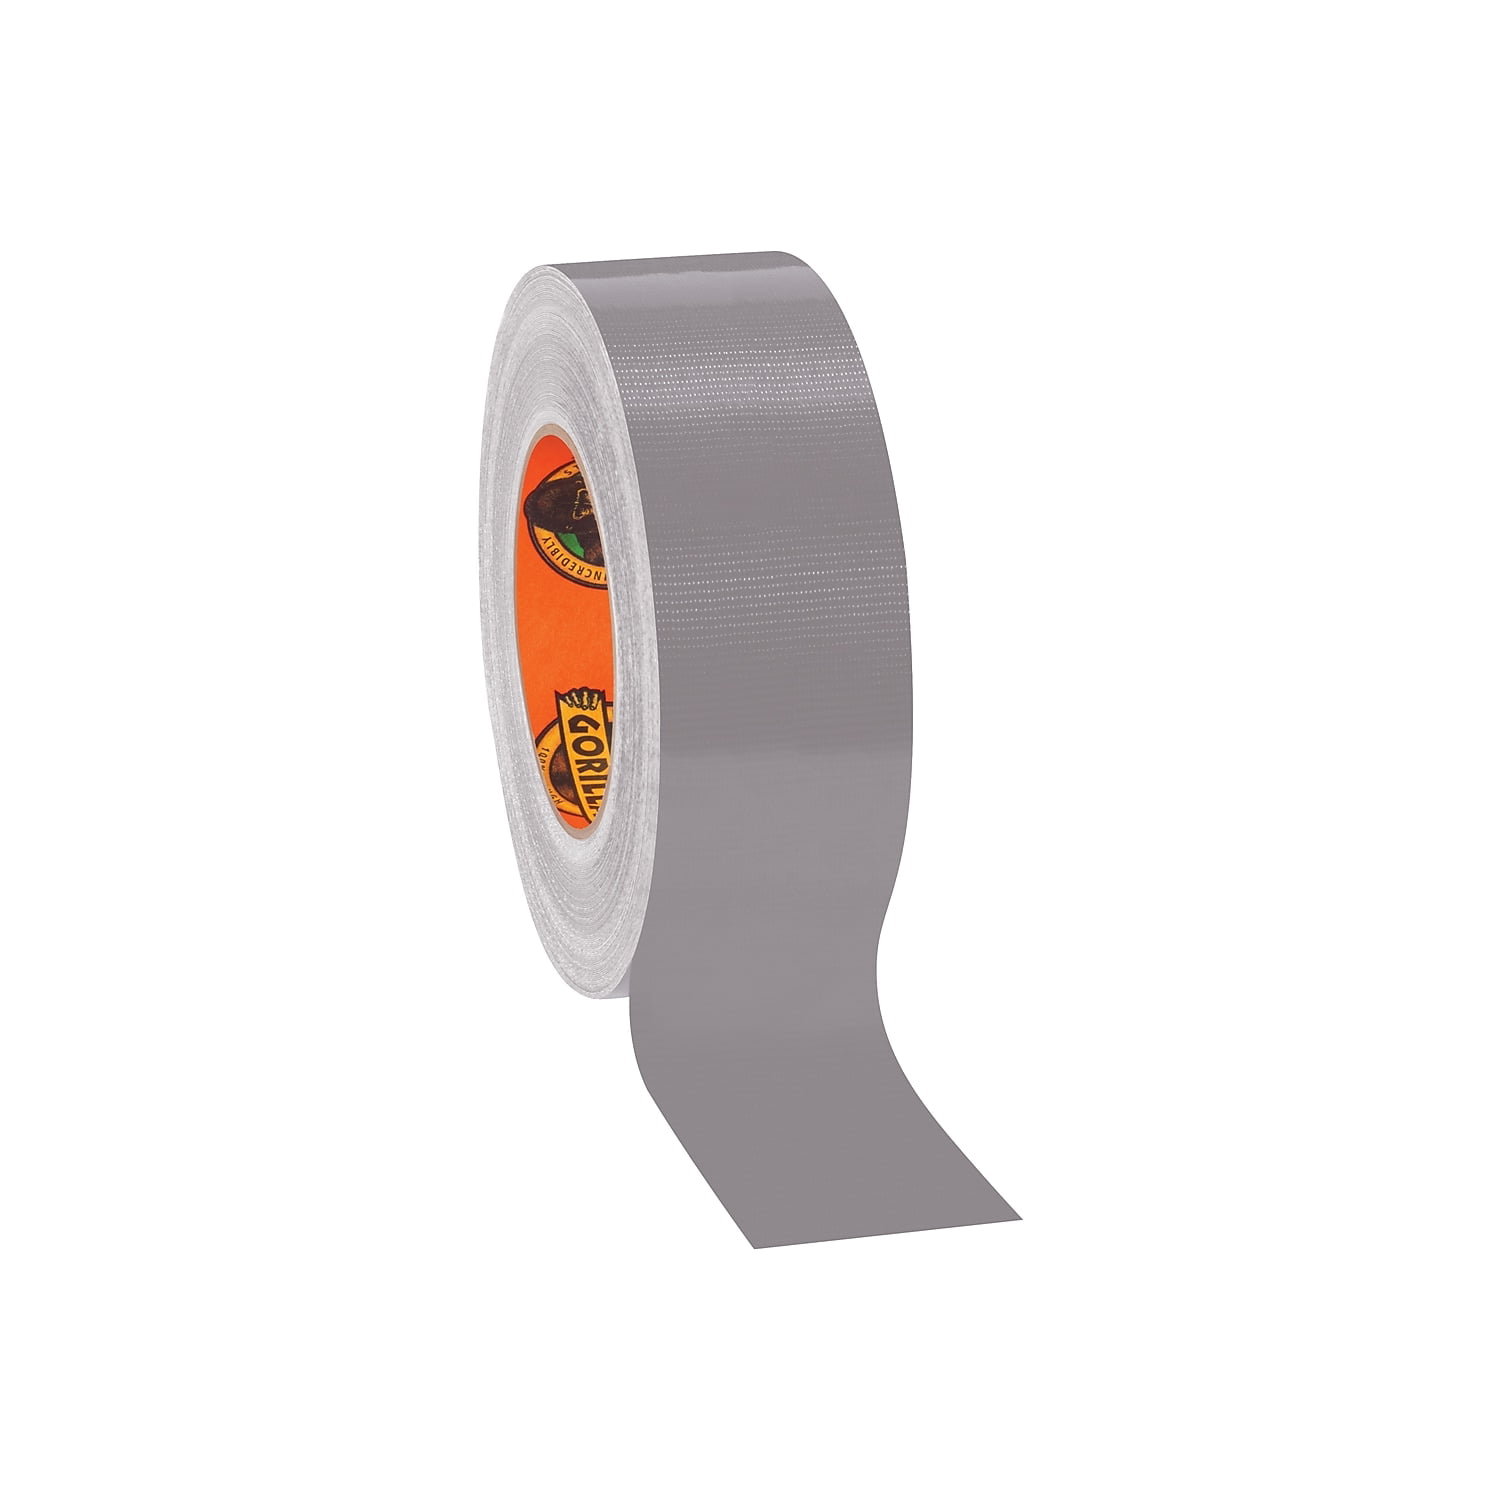 Adhggt240 2 In. X 35 Yard Silver Gorilla Duct Tape